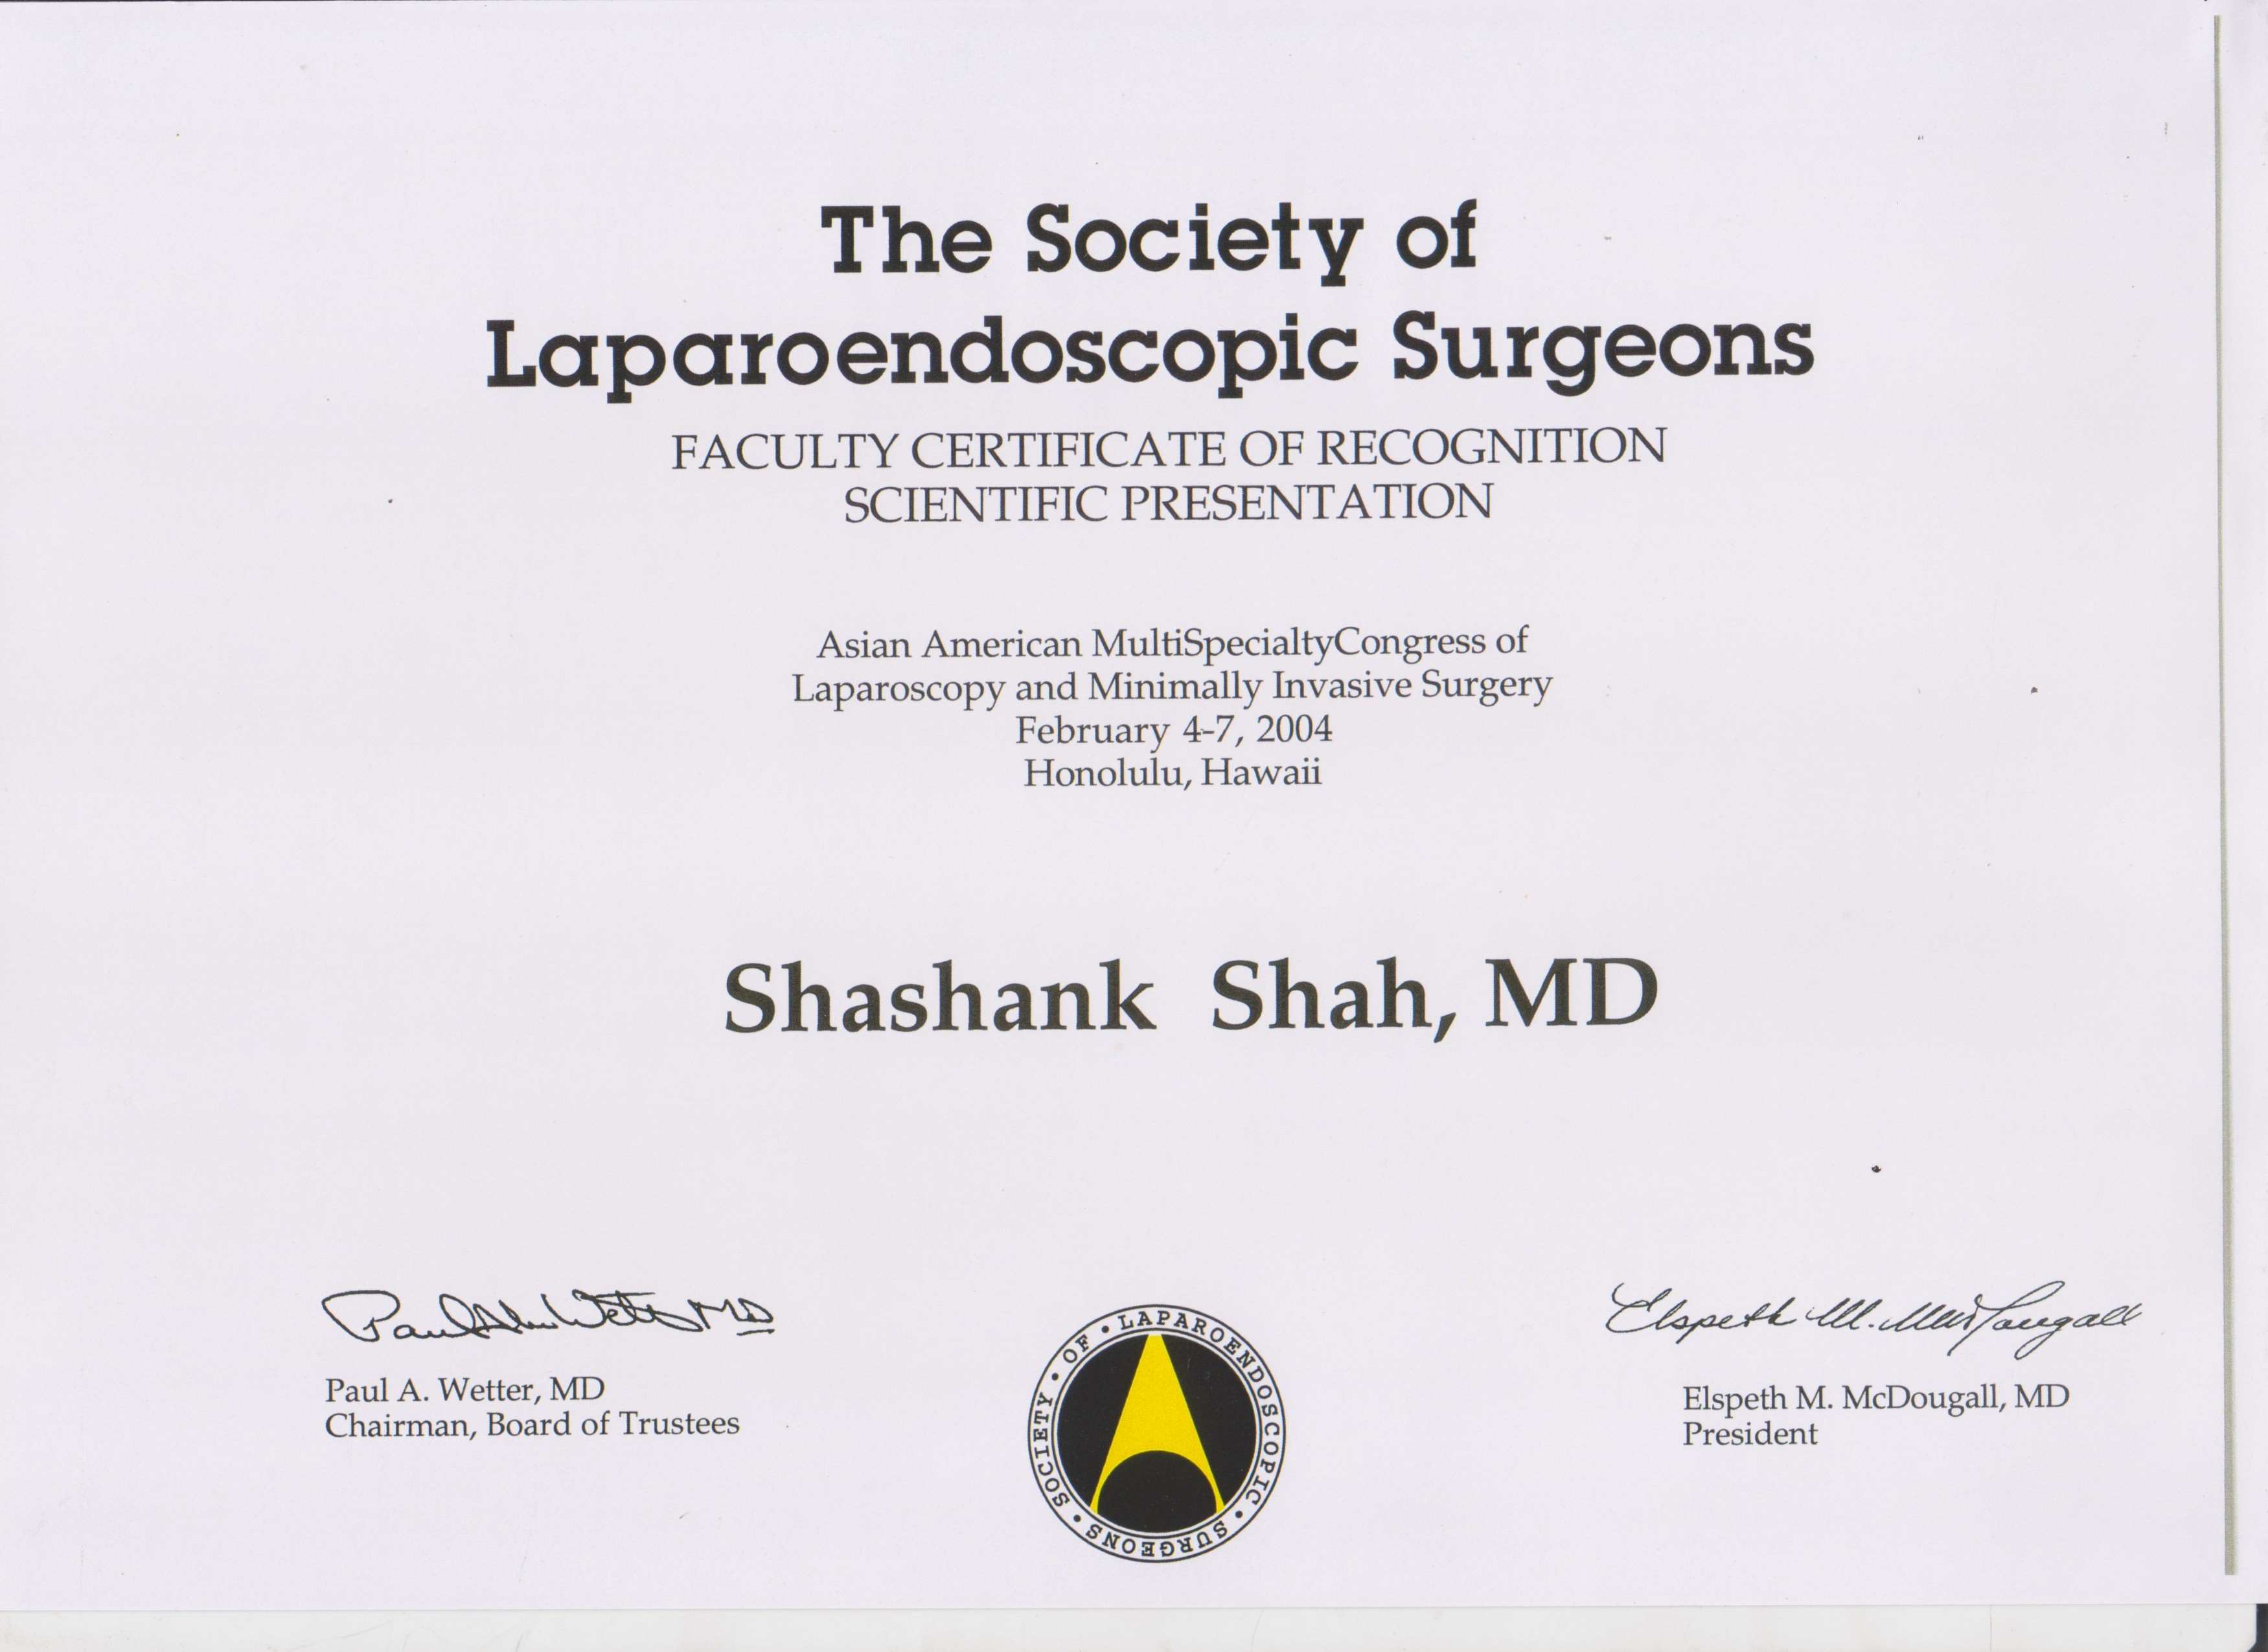 Dr Shashank Shah’s Faculty Certificate of Recognition at the Asian American Multispecialty Congress of Laparoscopy and Minimal Invasive Surgery in 2004 at Honolulu Hawaii, USA by the Society of Laparoendoscopic Surgeons. 